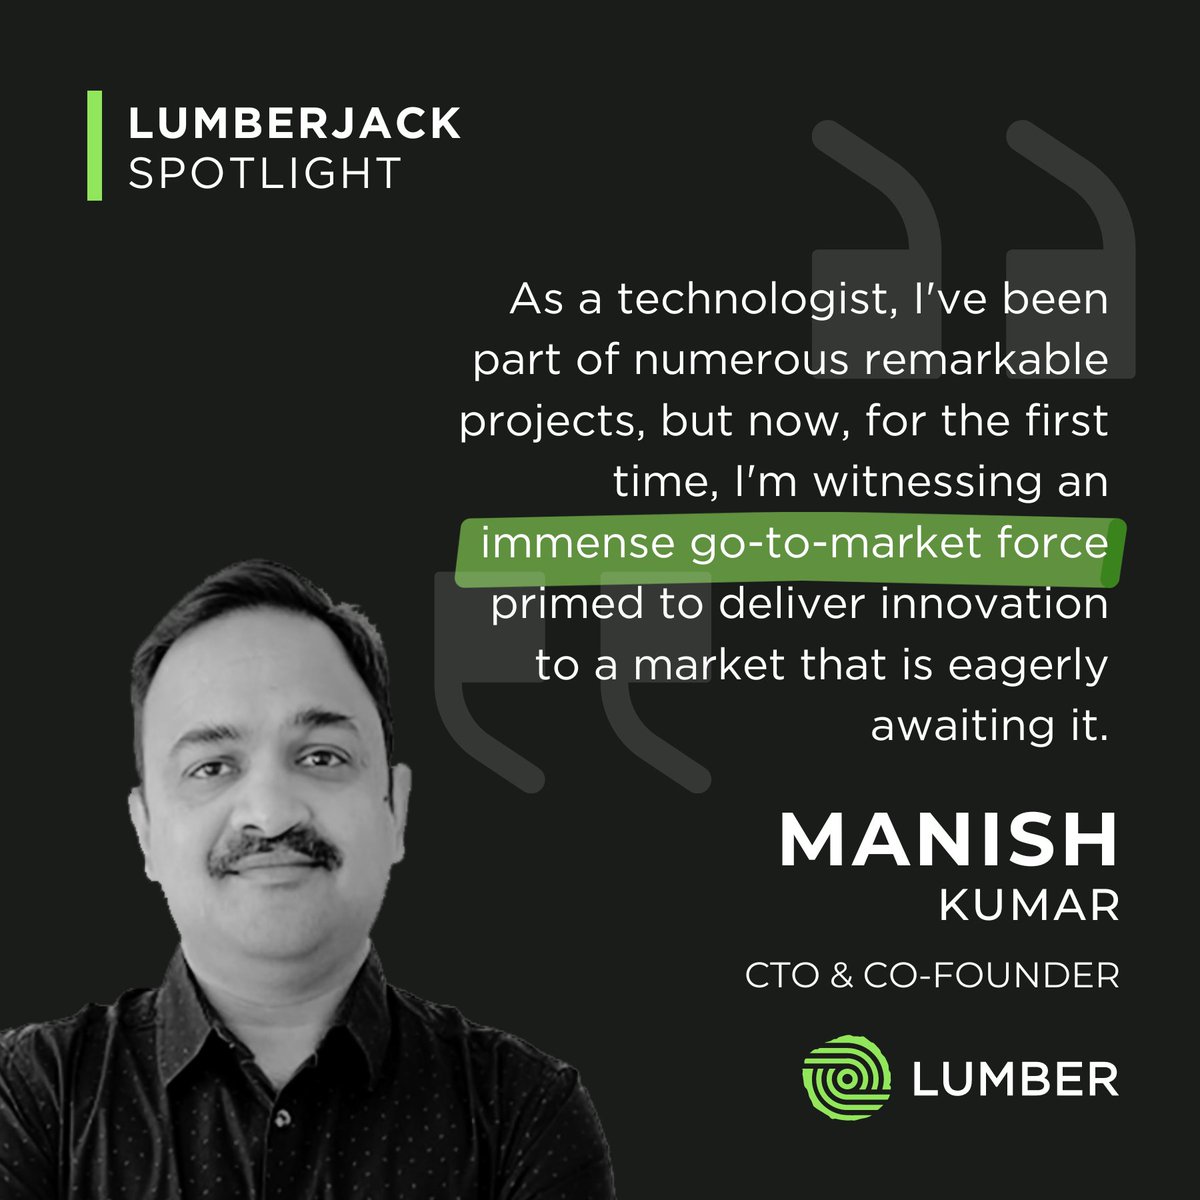 #LumberjackSpotlight 🪵🔦

It's time to shine the spotlight on someone who plays a pivotal role in driving our technological innovation forward: our CTO and Co-Founder, Manish Kumar! 💻

#Startup #Technology #Innovation